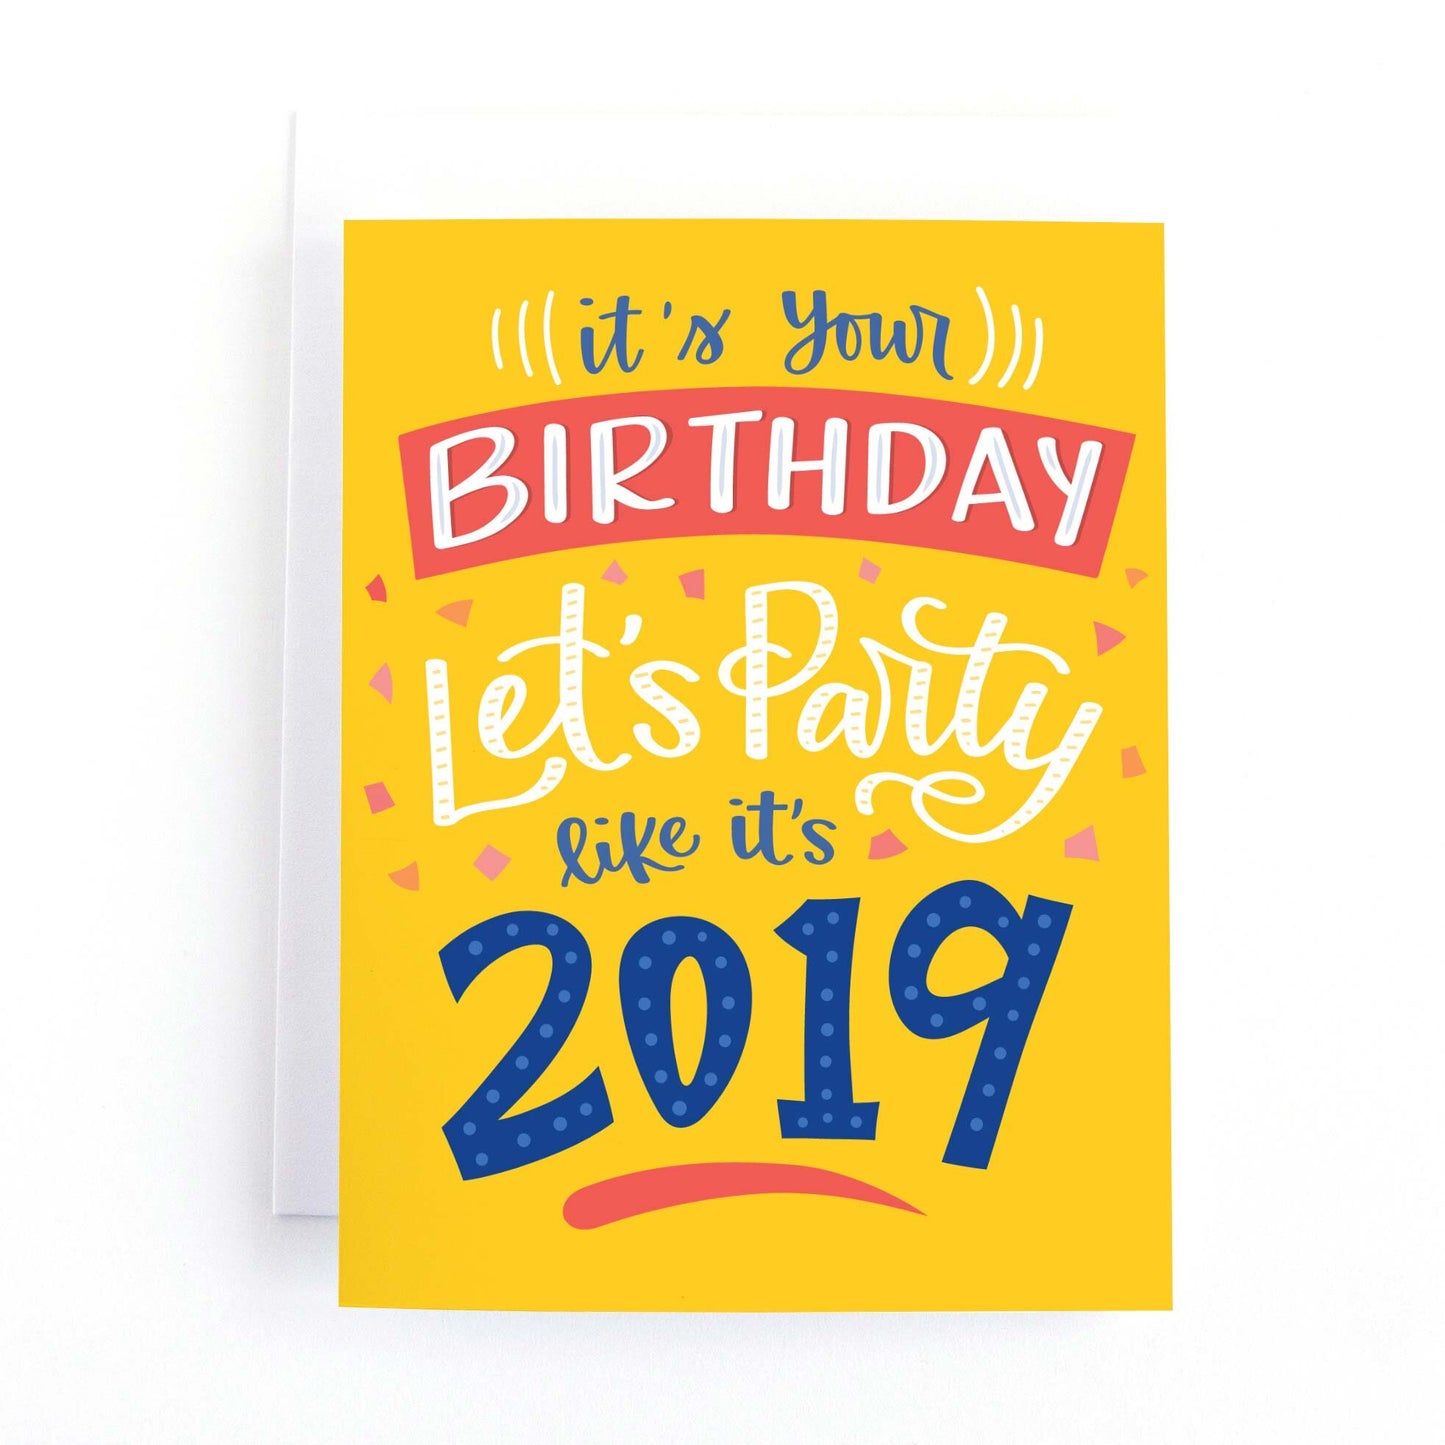 It's Your Birthday! Let's Party Like it's 2019 Funny Birthday Card